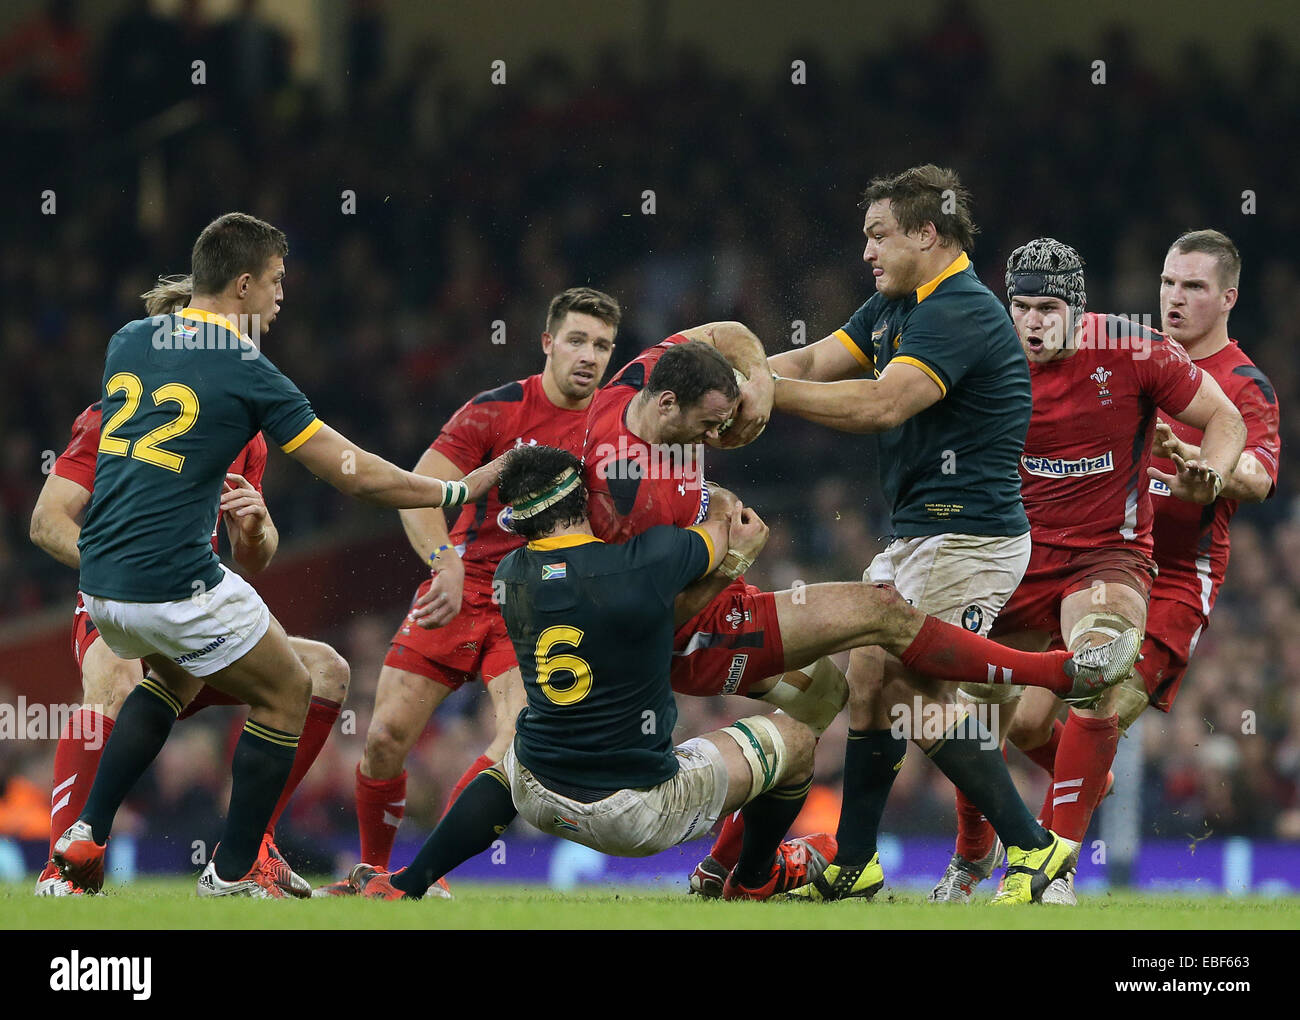 Cardiff, UK. 29th Nov, 2014. Jamie Roberts of Wales tackled by Marcell Coetzee of South Africa - Autumn Internationals - Wales vs South Africa - Millennium Stadium - Cardiff - Wales - 29th November 2014 - Picture Simon Bellis/Sportimage. Credit:  csm/Alamy Live News Stock Photo